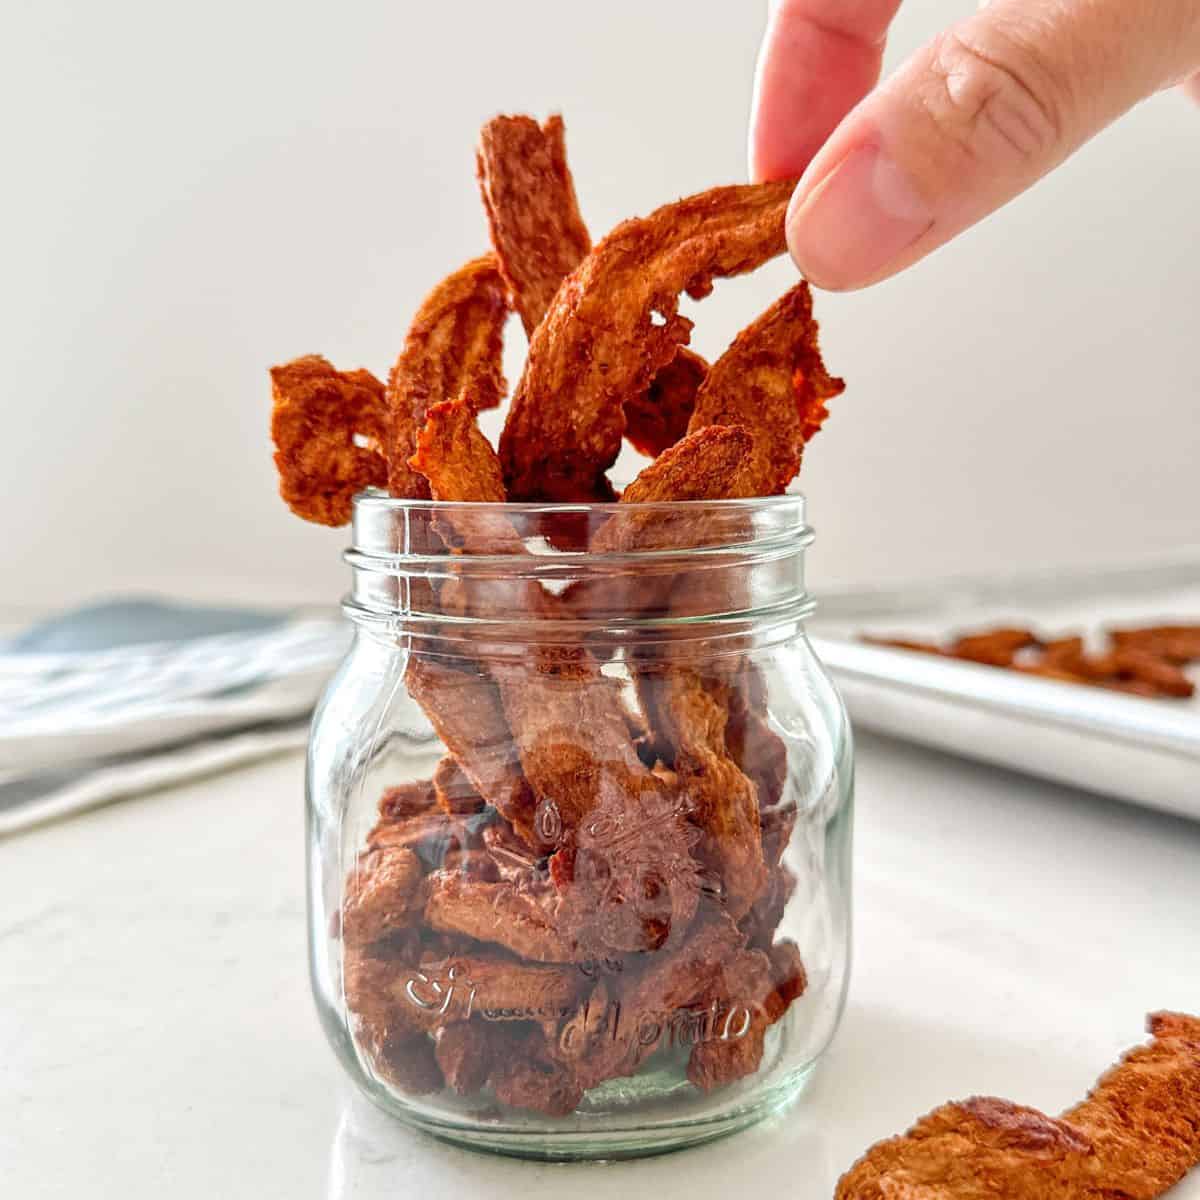 Hand pulling out a piece of vegan jerky from glass jar.